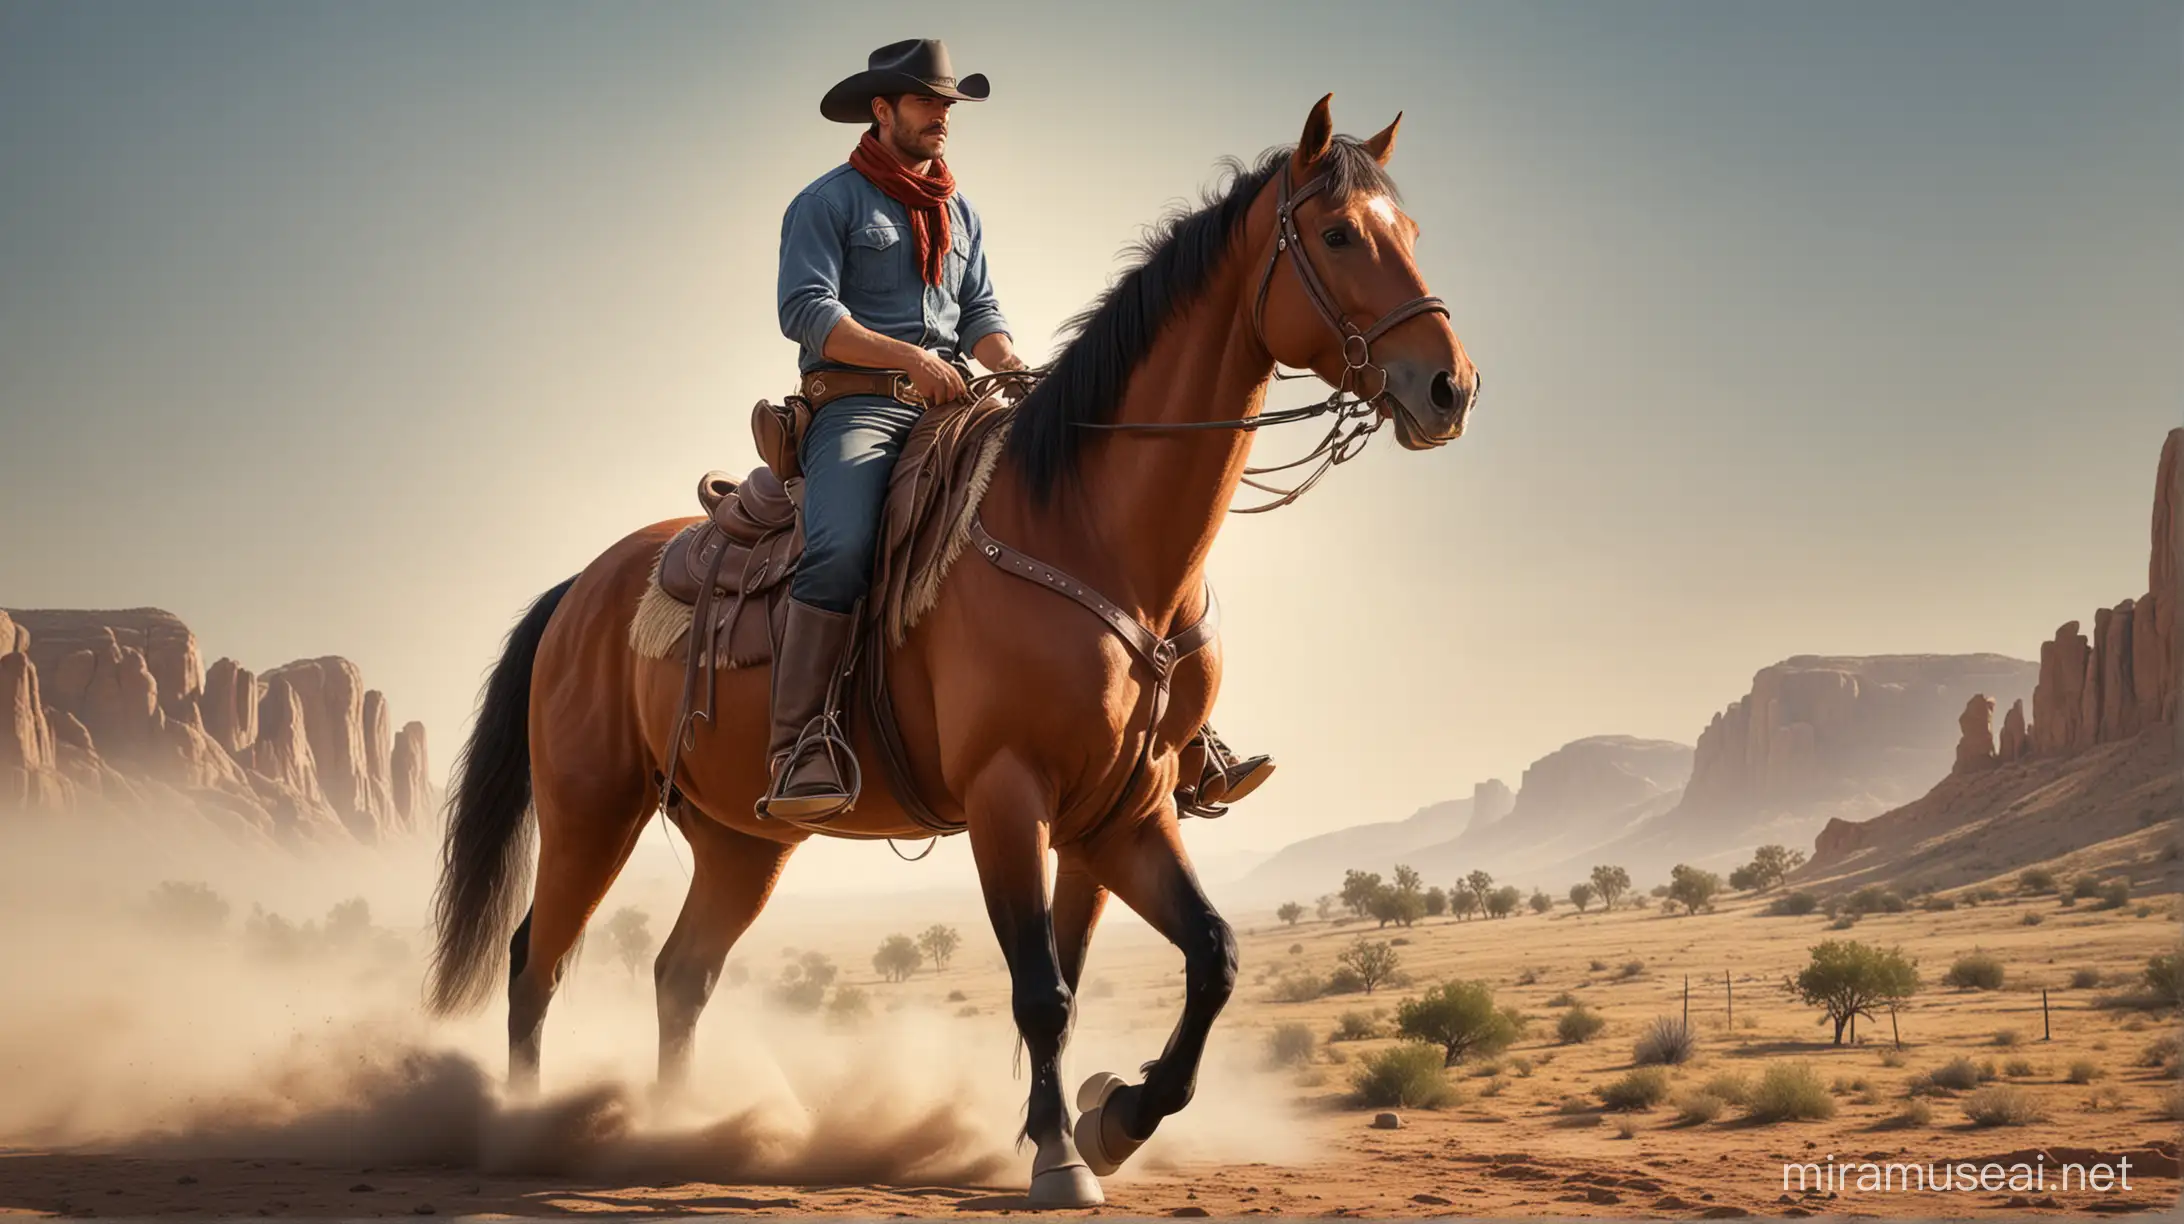 Cowboy Riding a Horse in Realistic Style